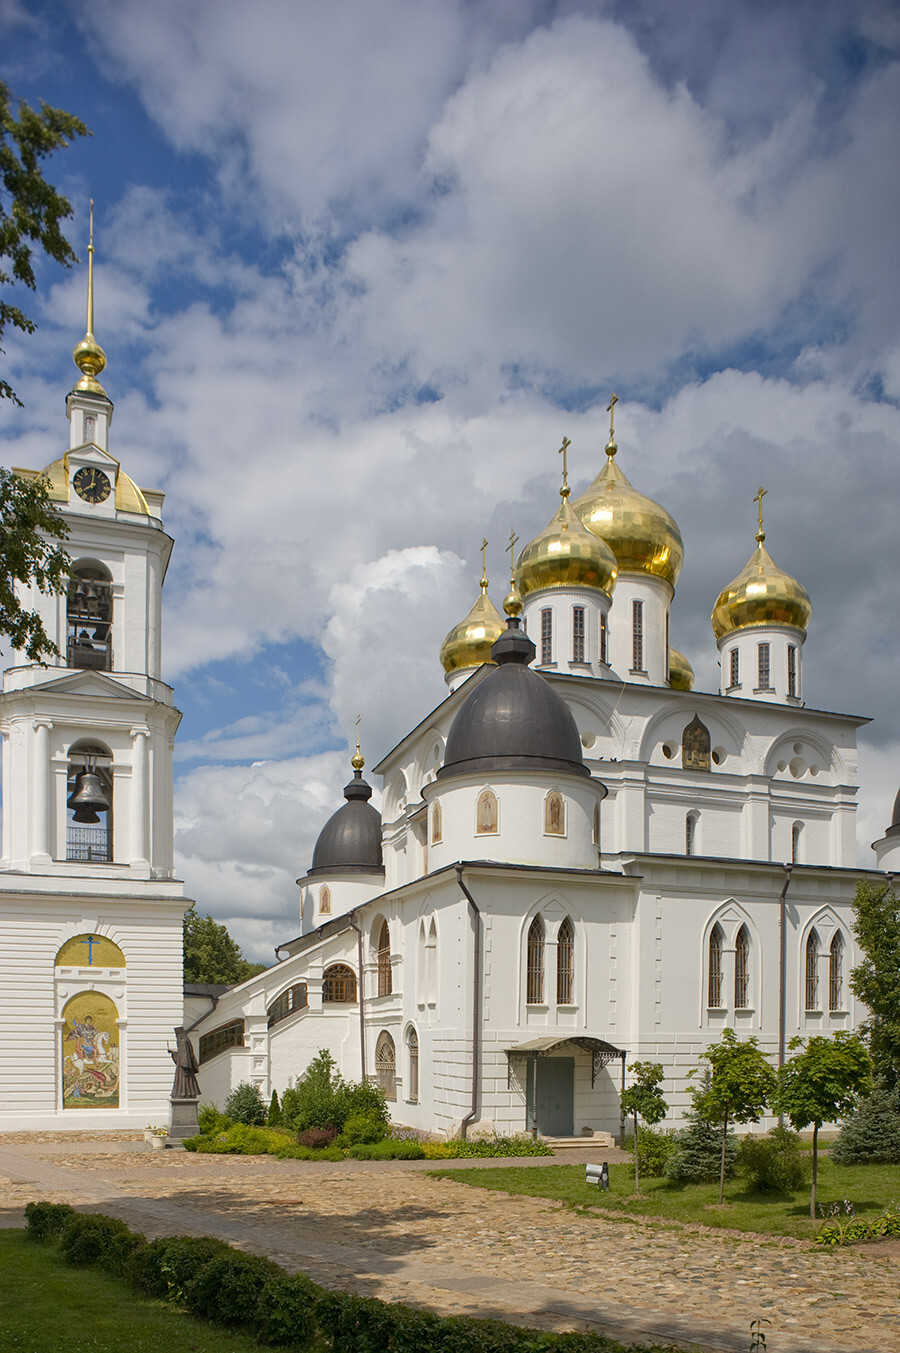 Dormition Cathedral & bell tower, southwest view. Foreground: attached Chapel of St. Sergius Rodonezh. July 18, 2015